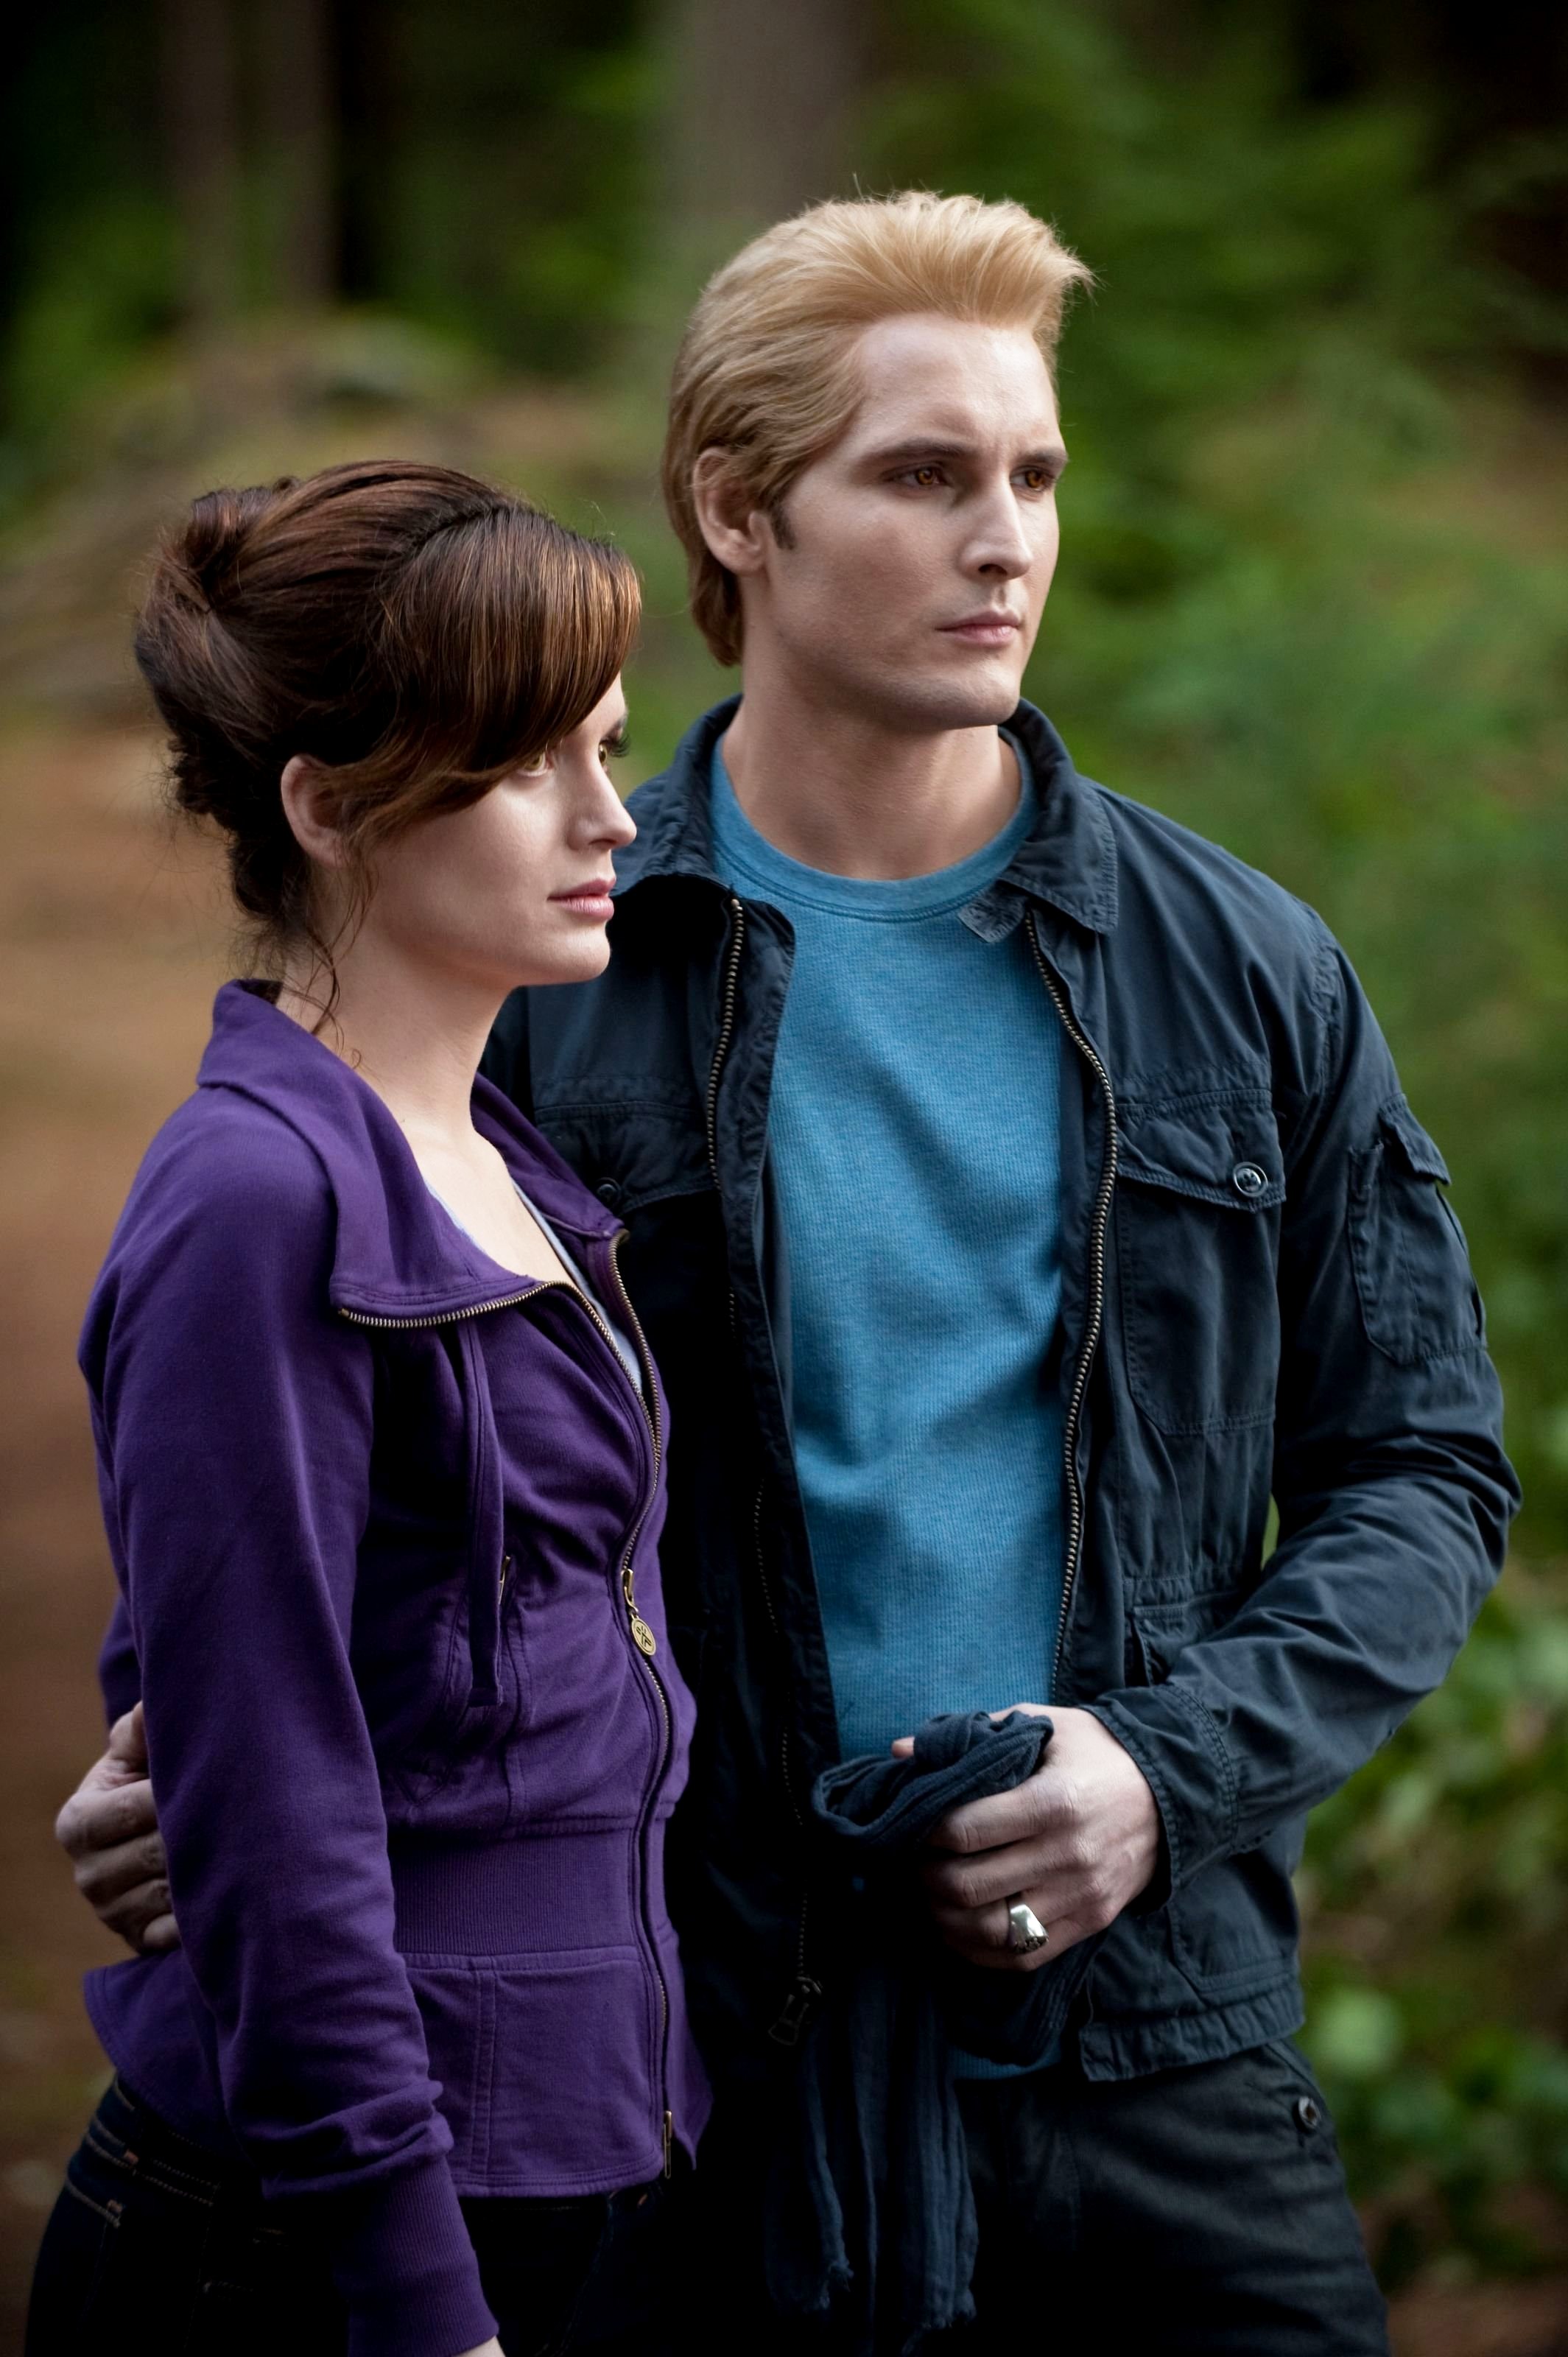 Elizabeth Reaser stars as Esme Cullen and Peter Facinelli stars as Dr. Carlisle Cullen in Summit Entertainment's The Twilight Saga's Eclipse (2010)